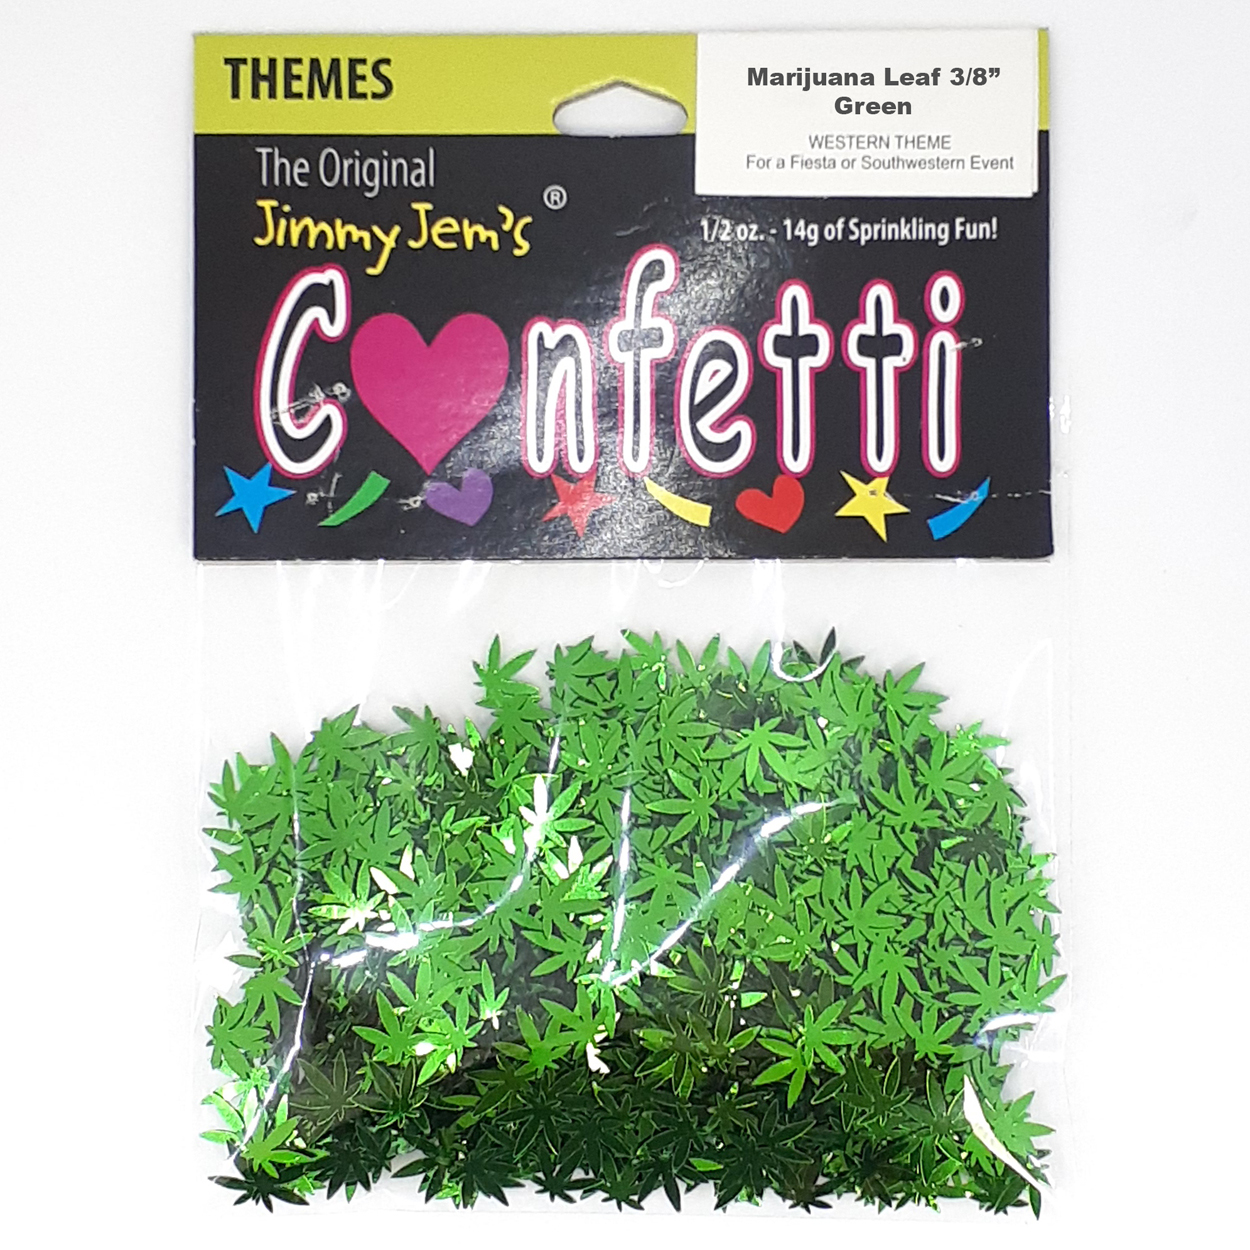 Primary image for Confetti Marijuana Leaf 3/8" Green - Retail Pack #9713 Free SHIPPING